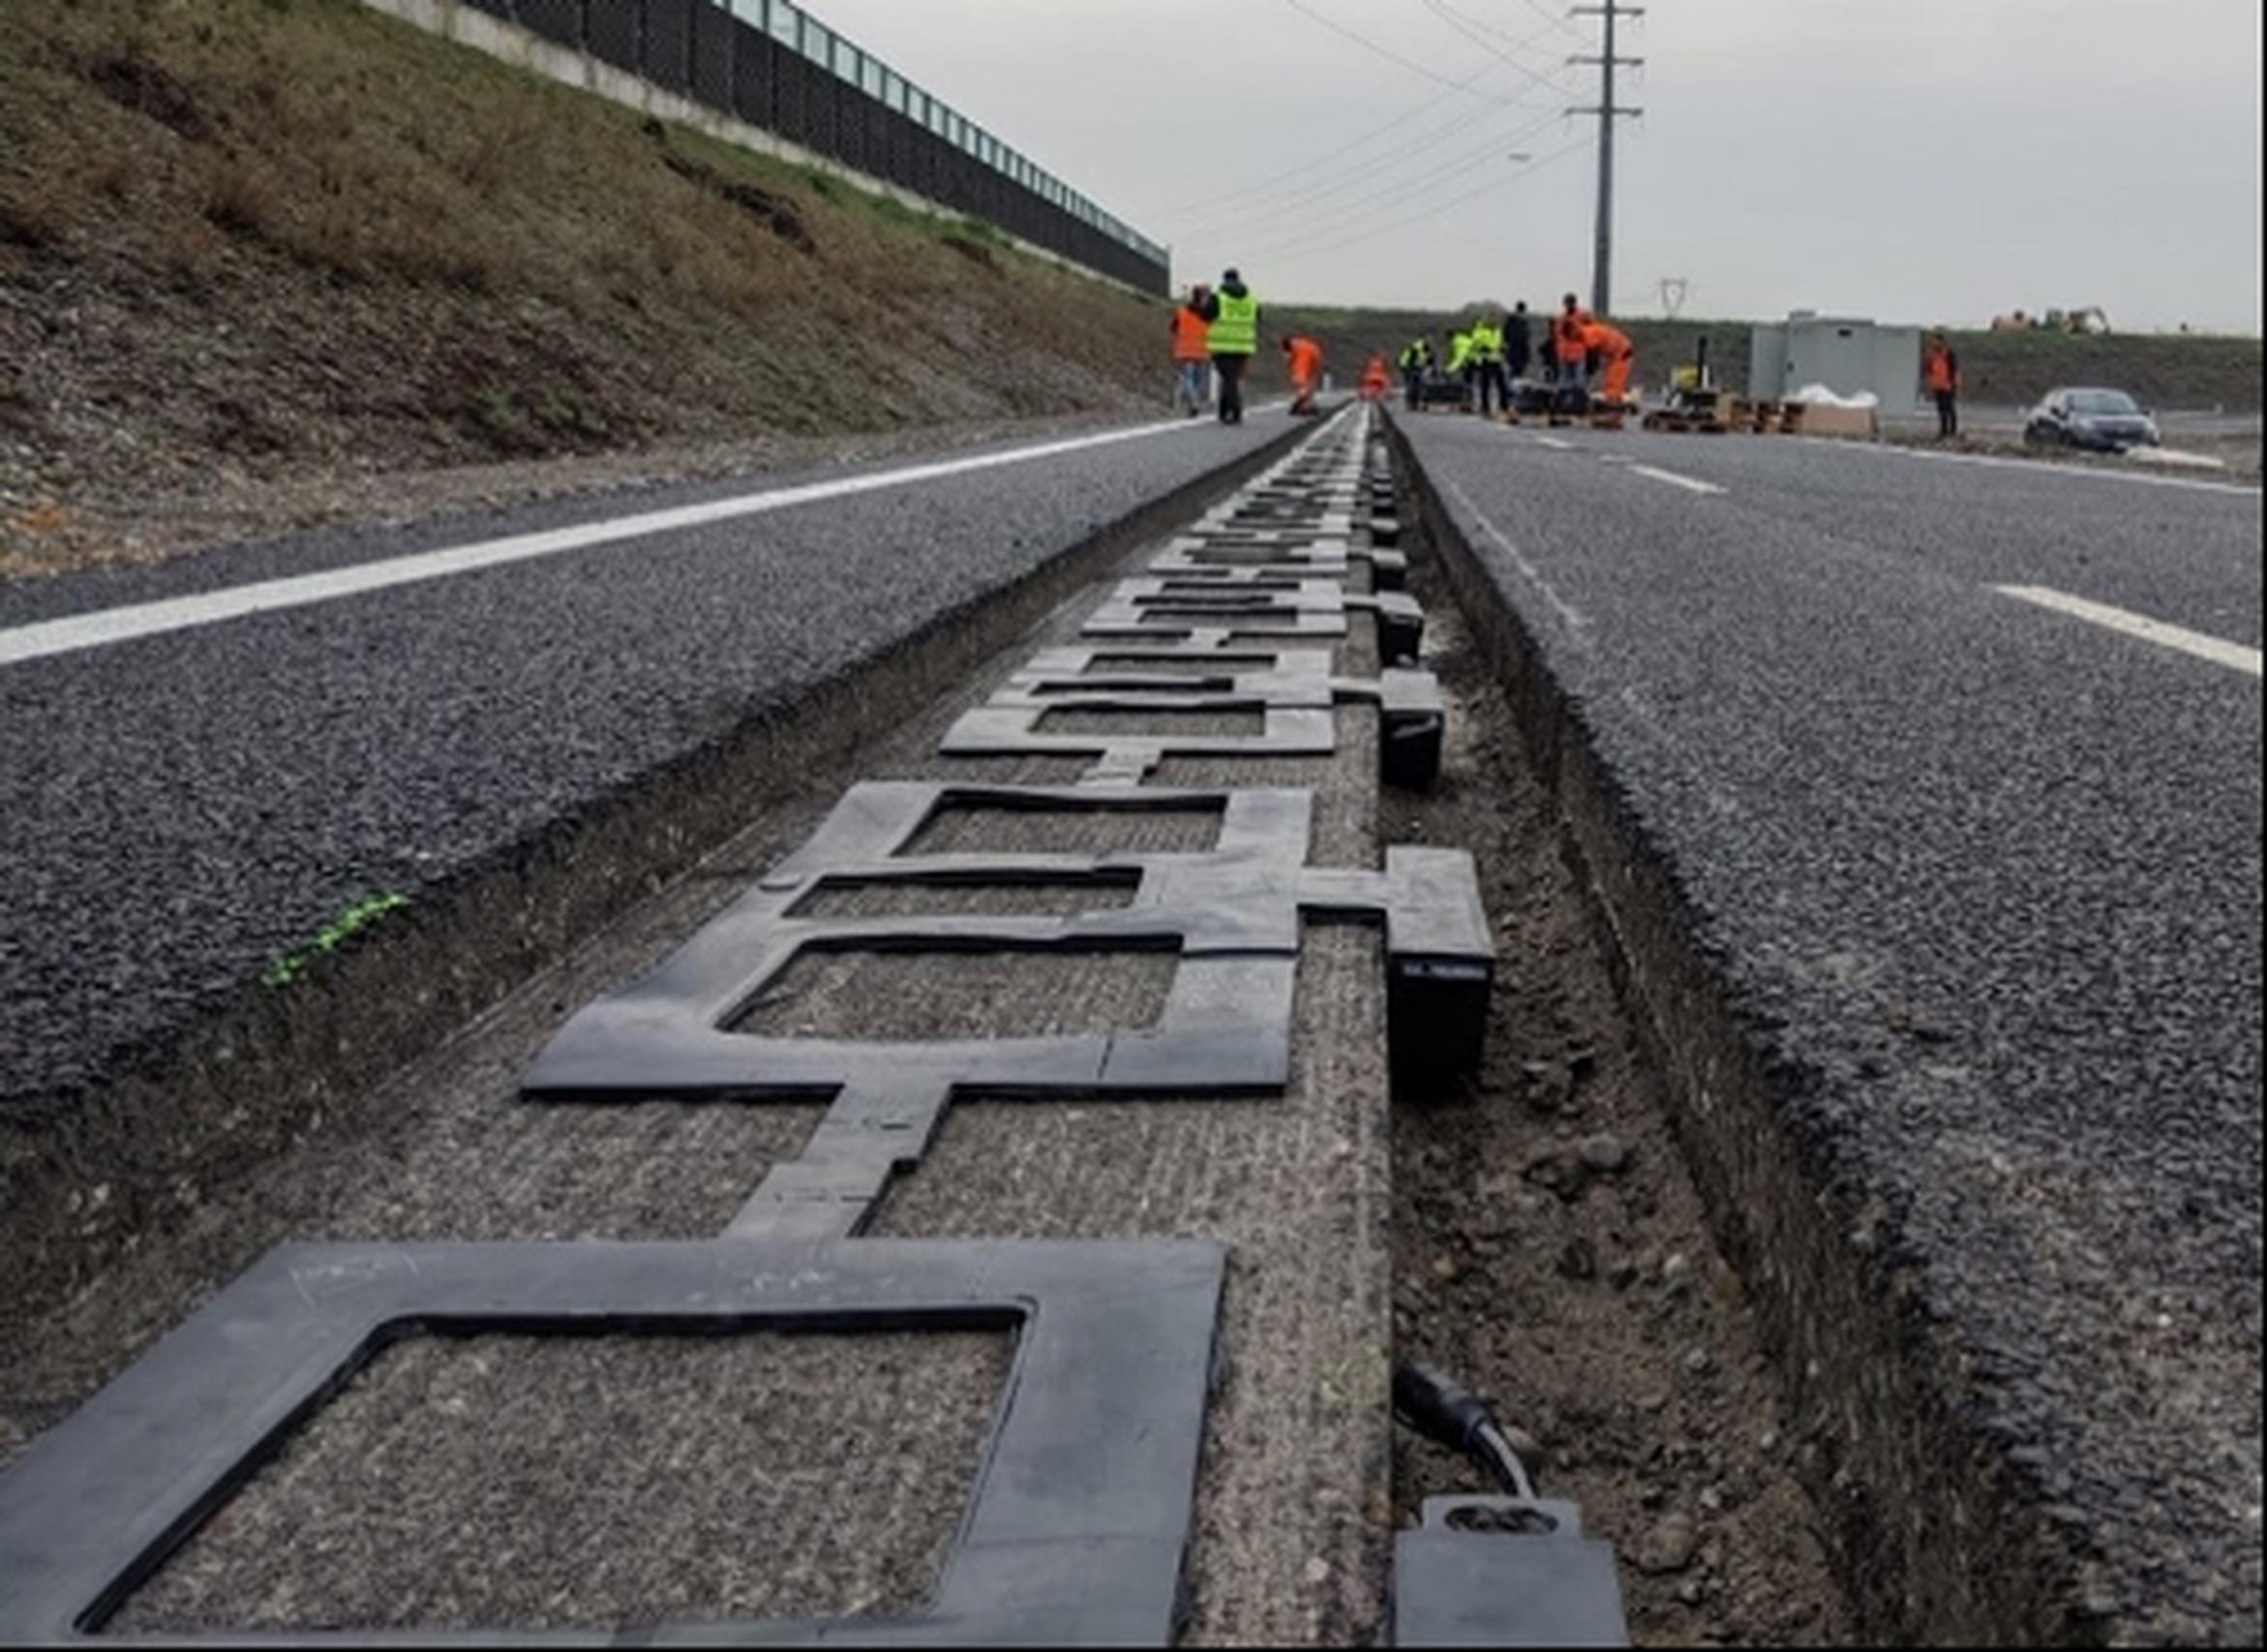 Dynacov uses dynamic wireless transfer technology to establish an automatic connection between subscribing vehicles and metal coils fitted below the road surface